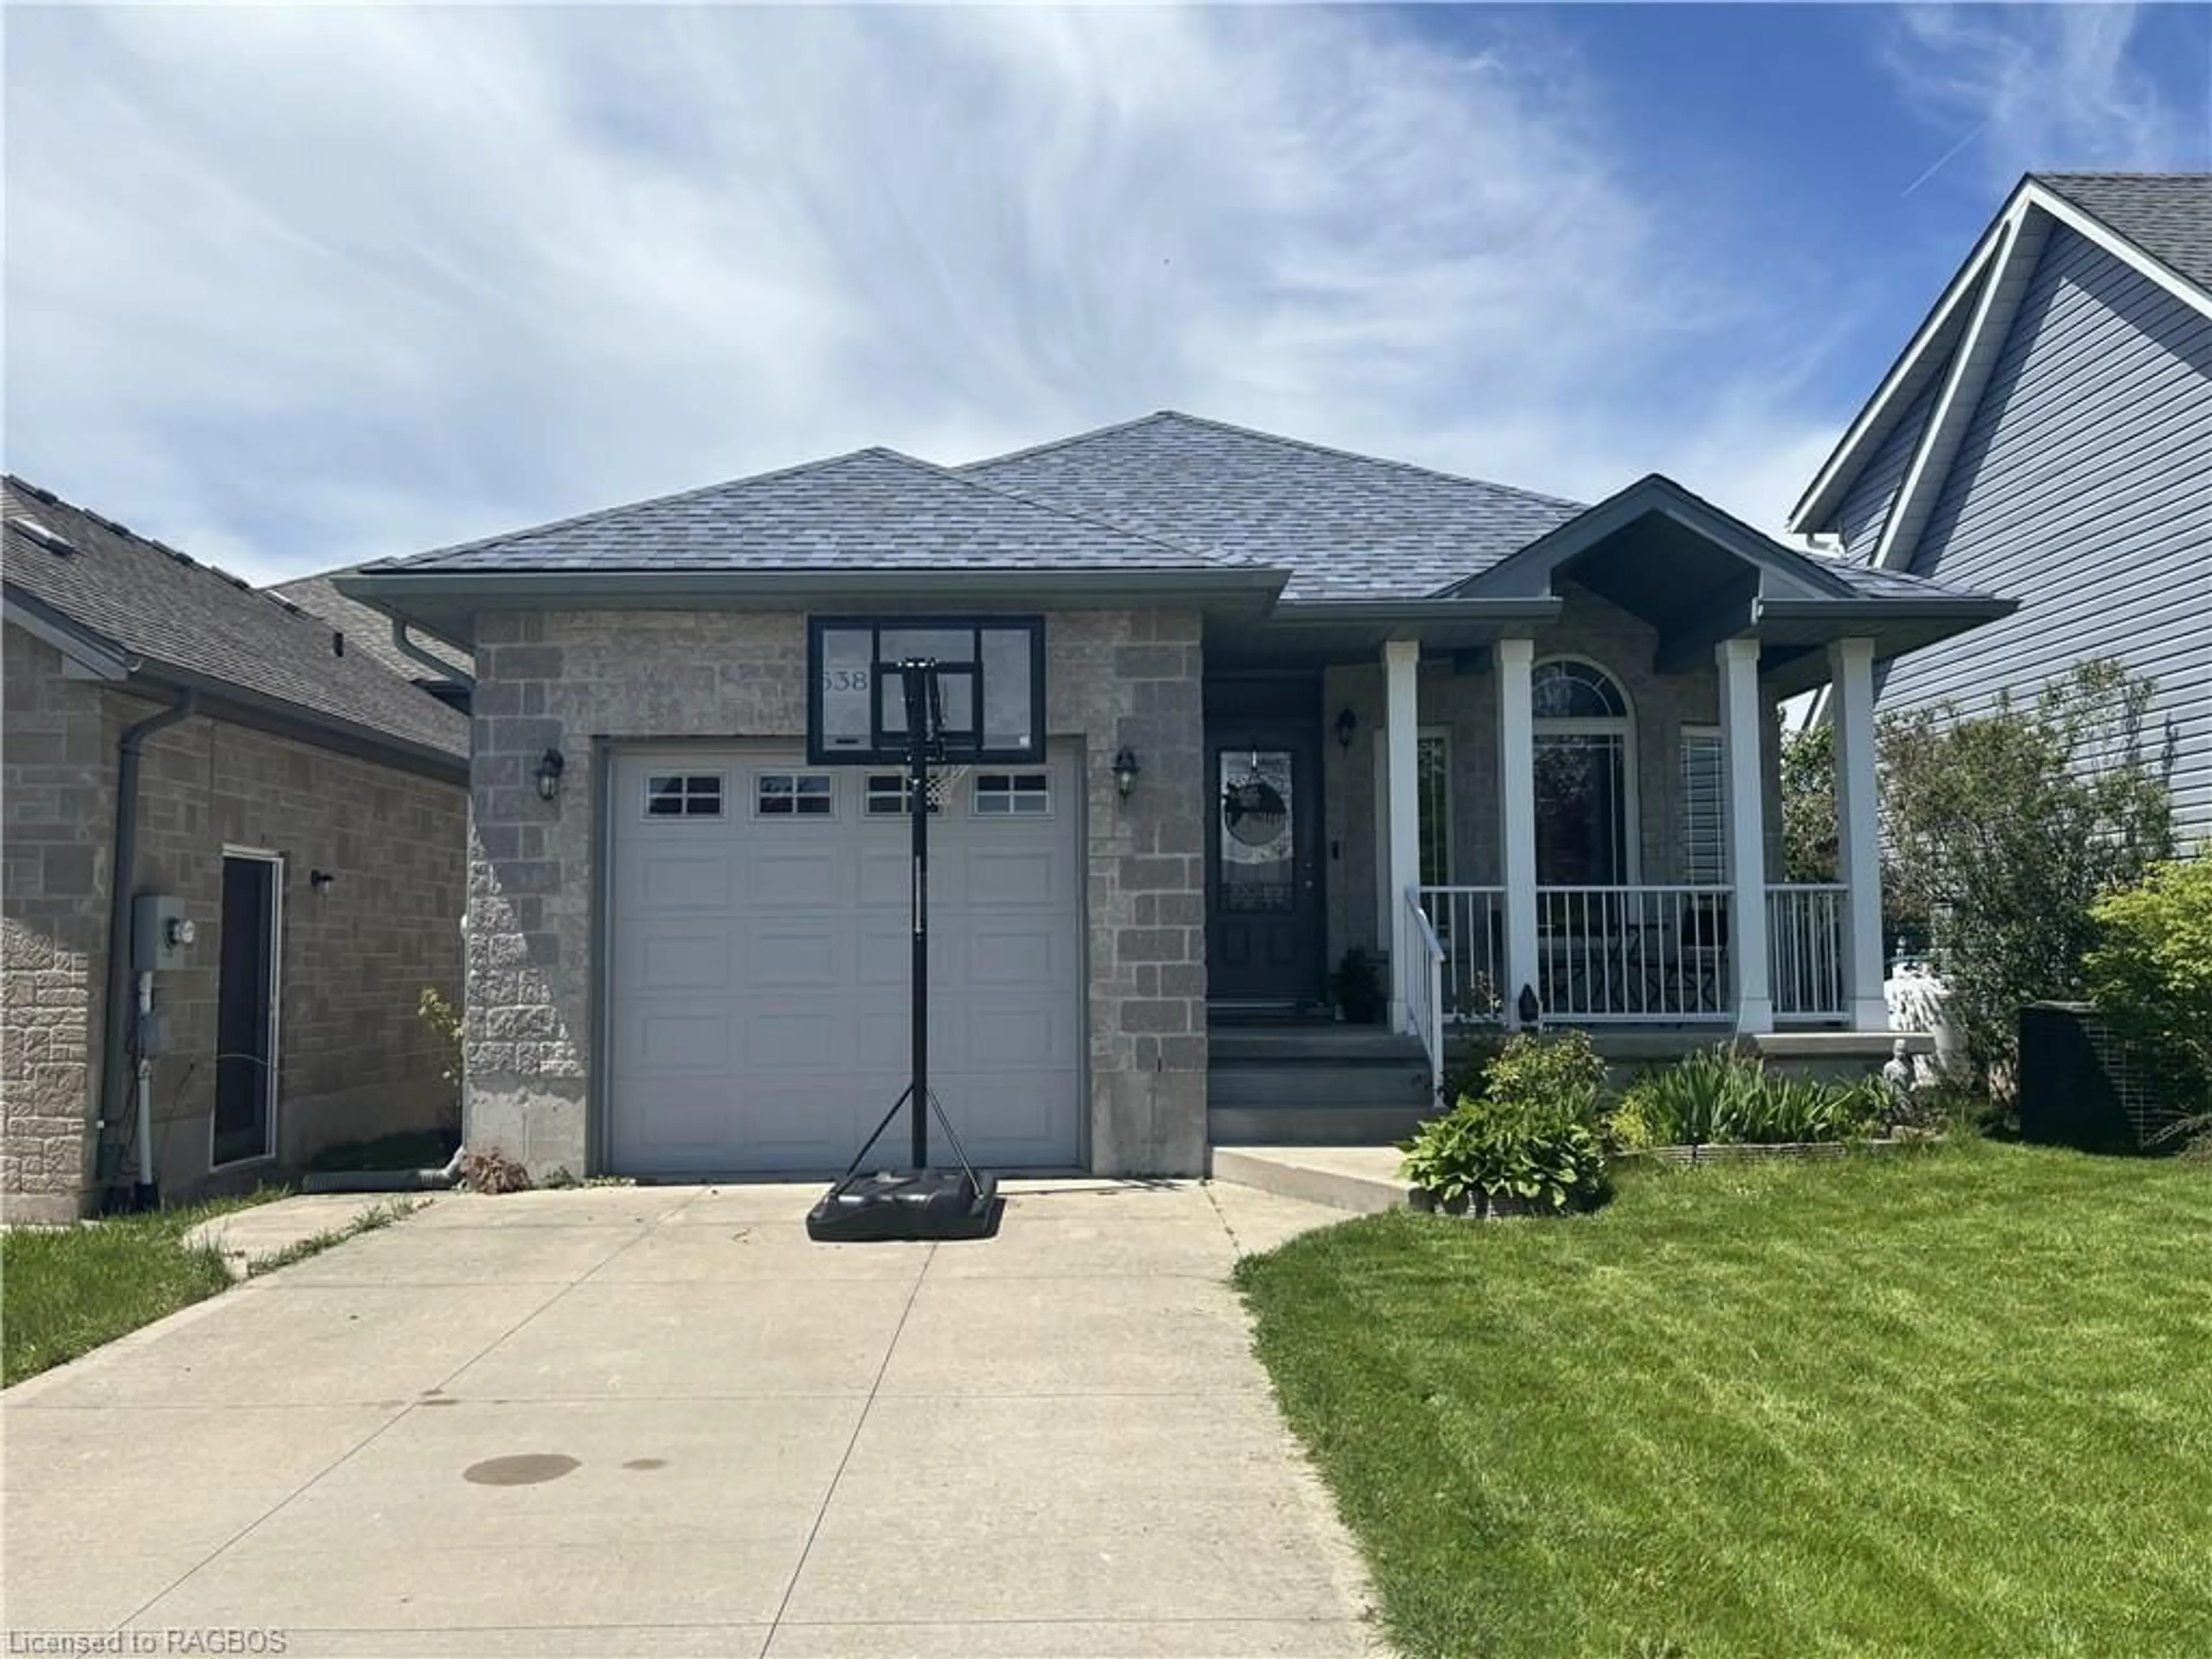 Frontside or backside of a home for 638 Kennard Cres, Kincardine Ontario N2Z 1T4